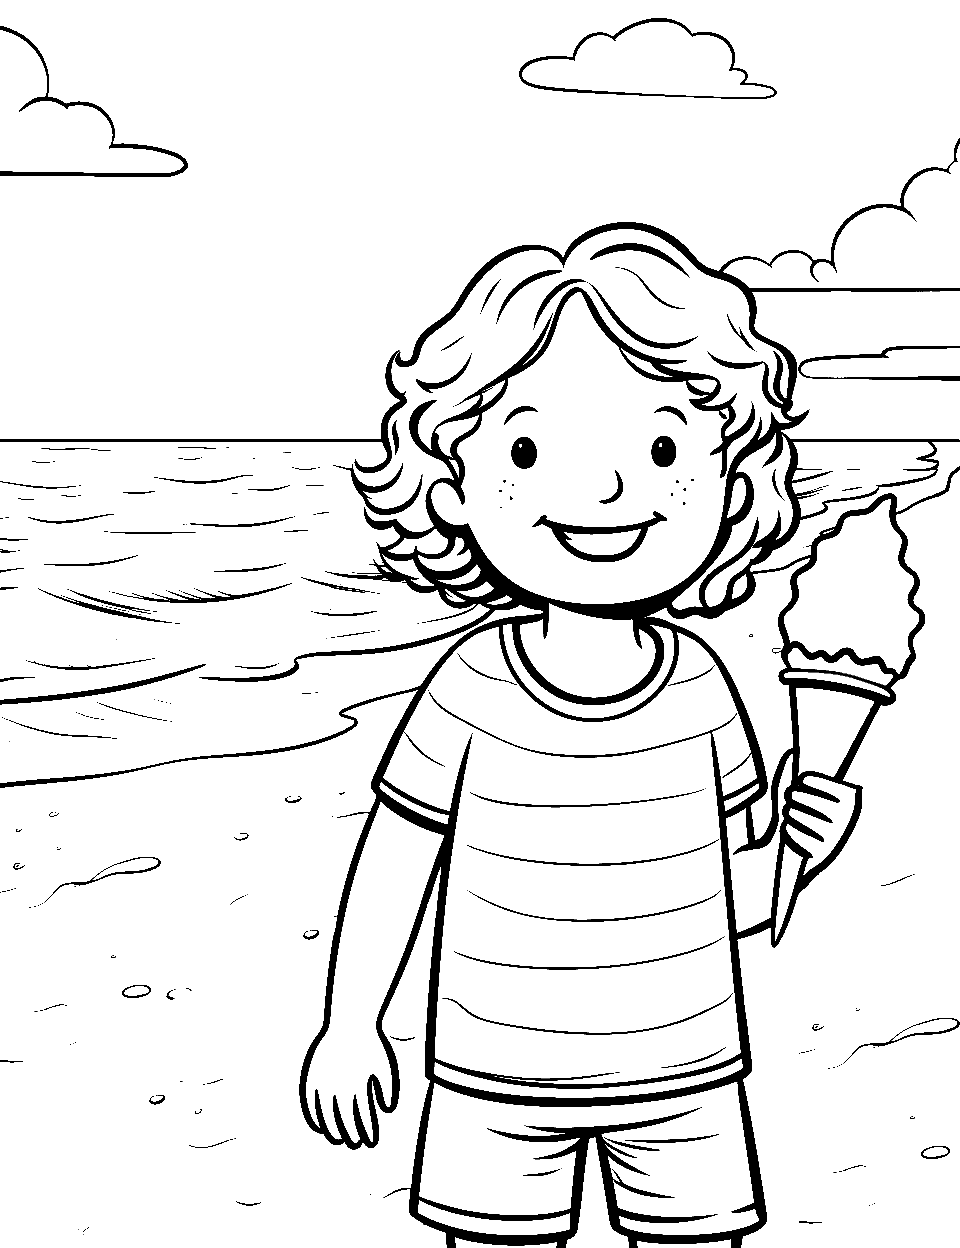 Ice Cream at the Beach Ocean Coloring Page - A child holding an ice cream cone, with the beach and ocean behind them.